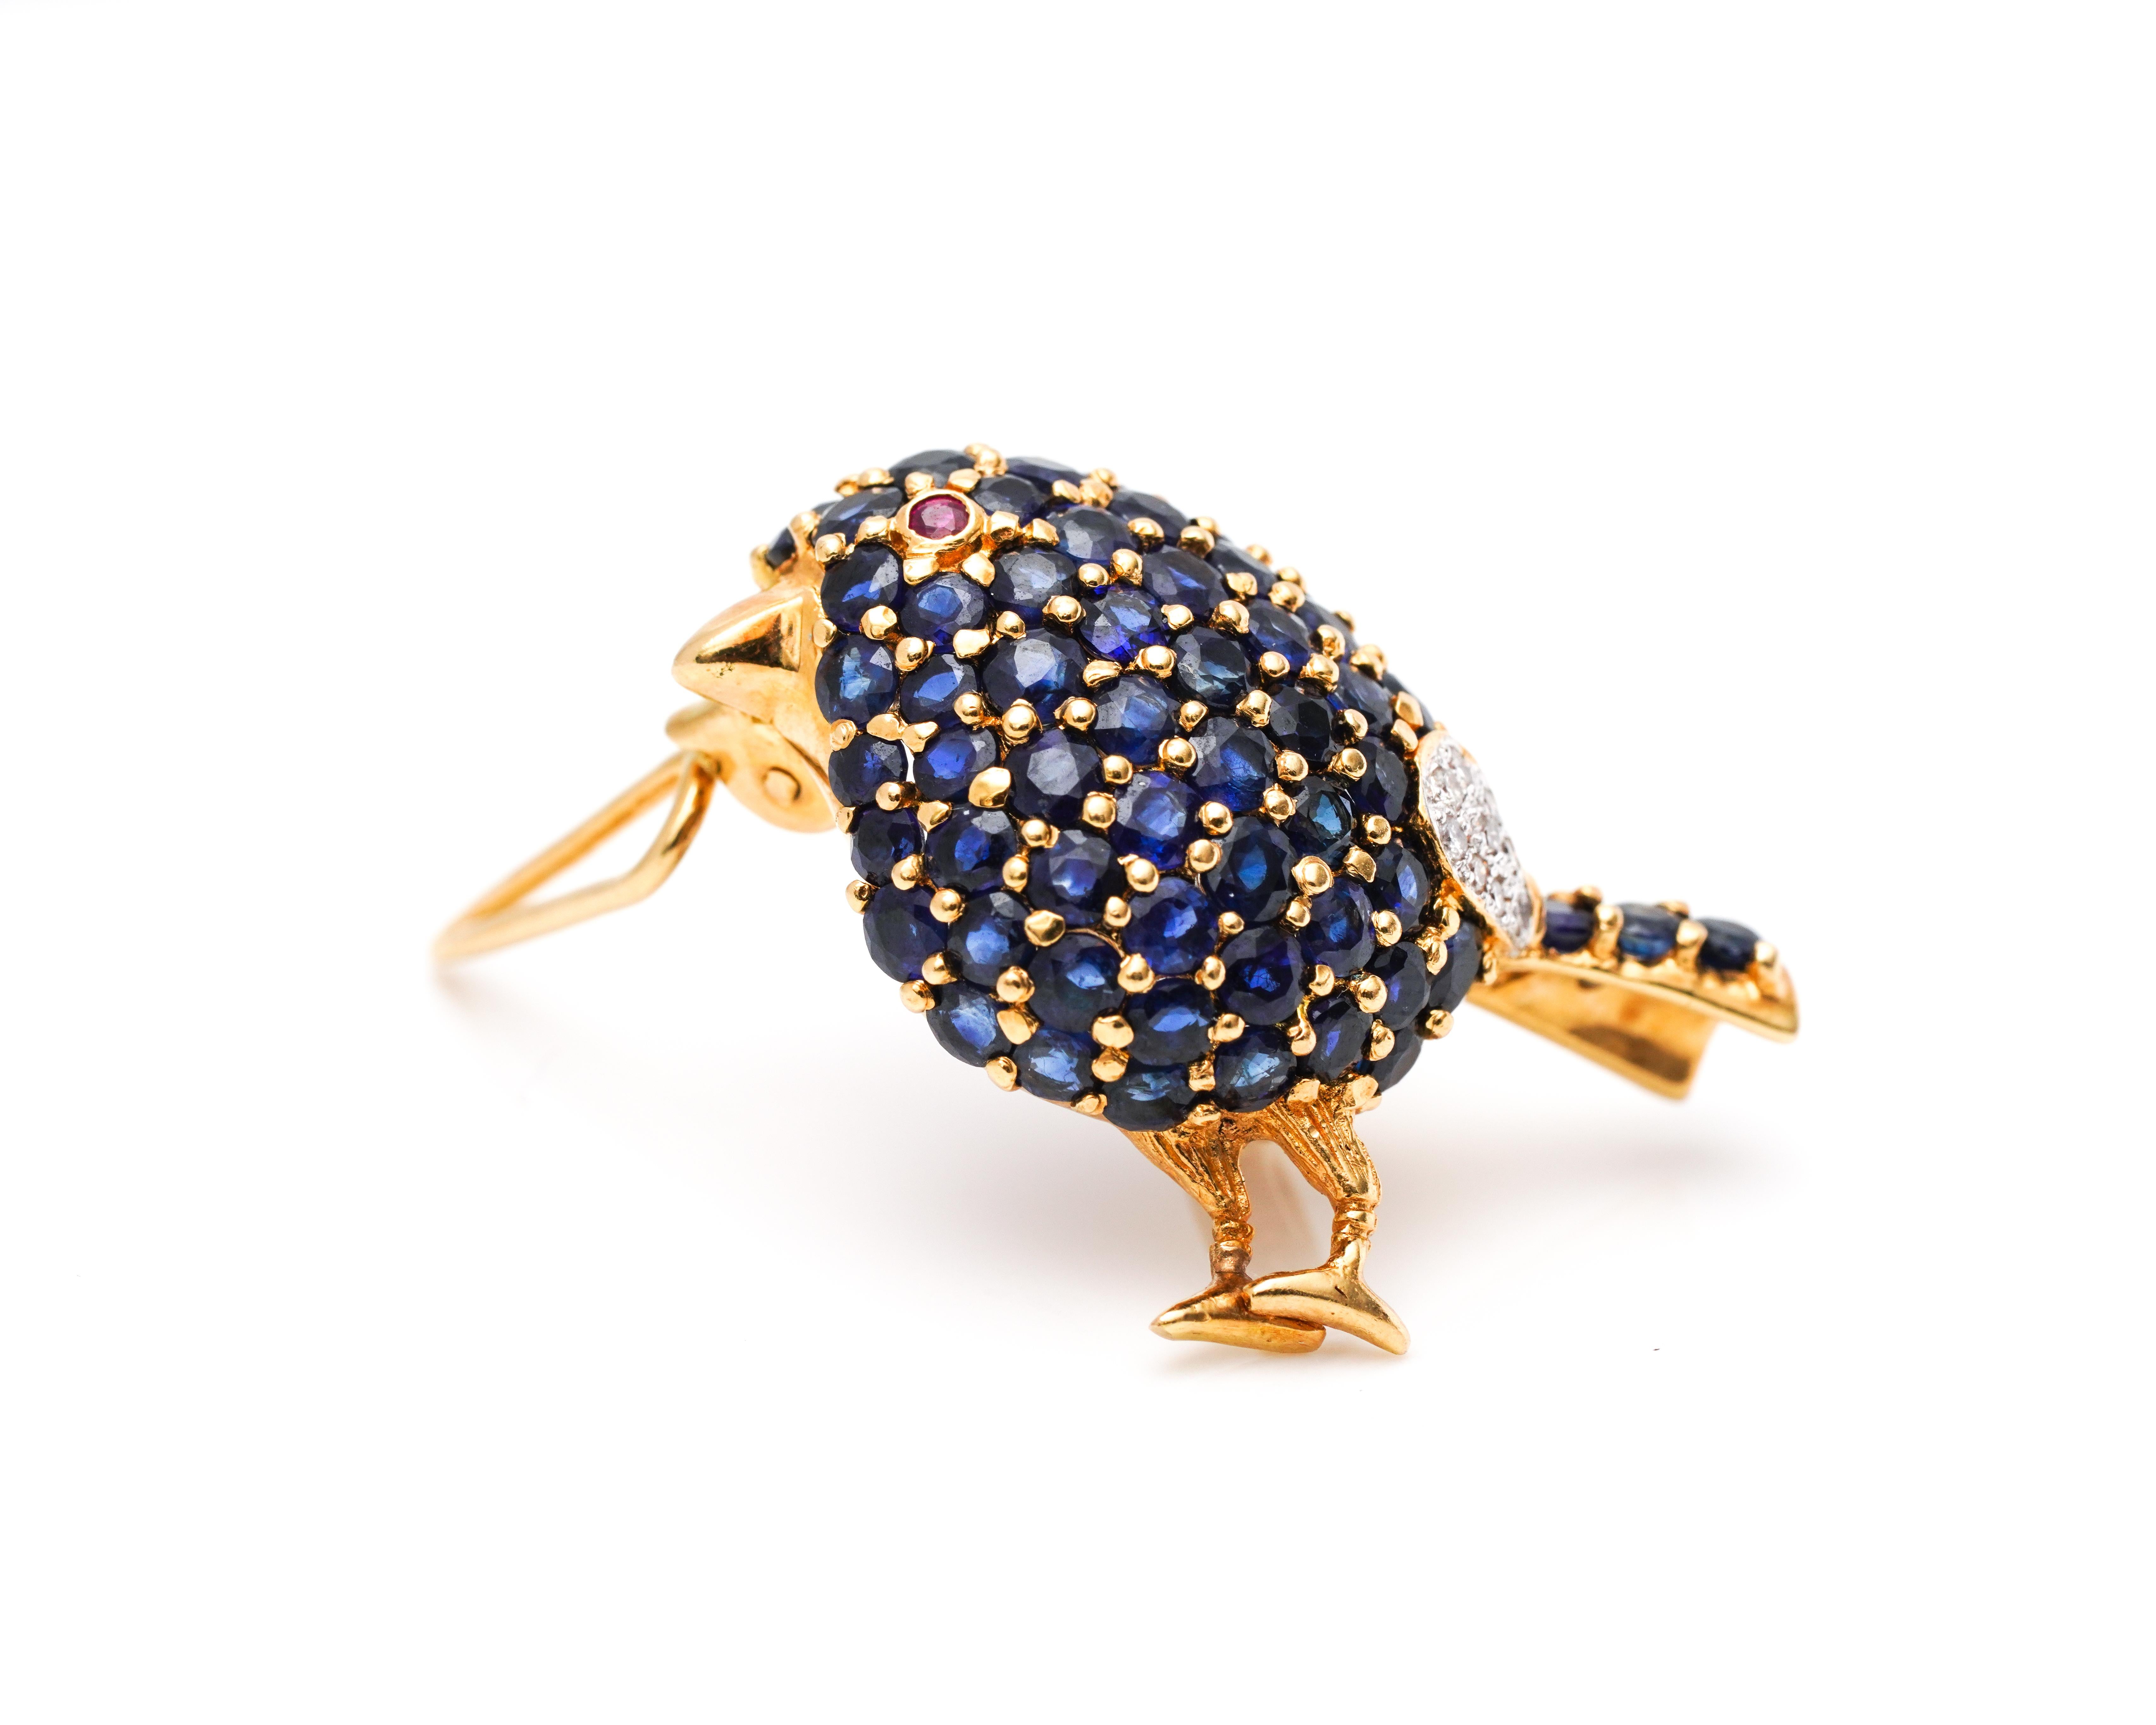 Bird Details:
Metal type: 18 Karat Yellow Gold
Weight: 7.5 grams

Features 1 Carat of Sapphires, Natural Blue in Color (body)
Features Accent Ruby (eye) and Diamonds (near the tail) 
Dates back to 1950s